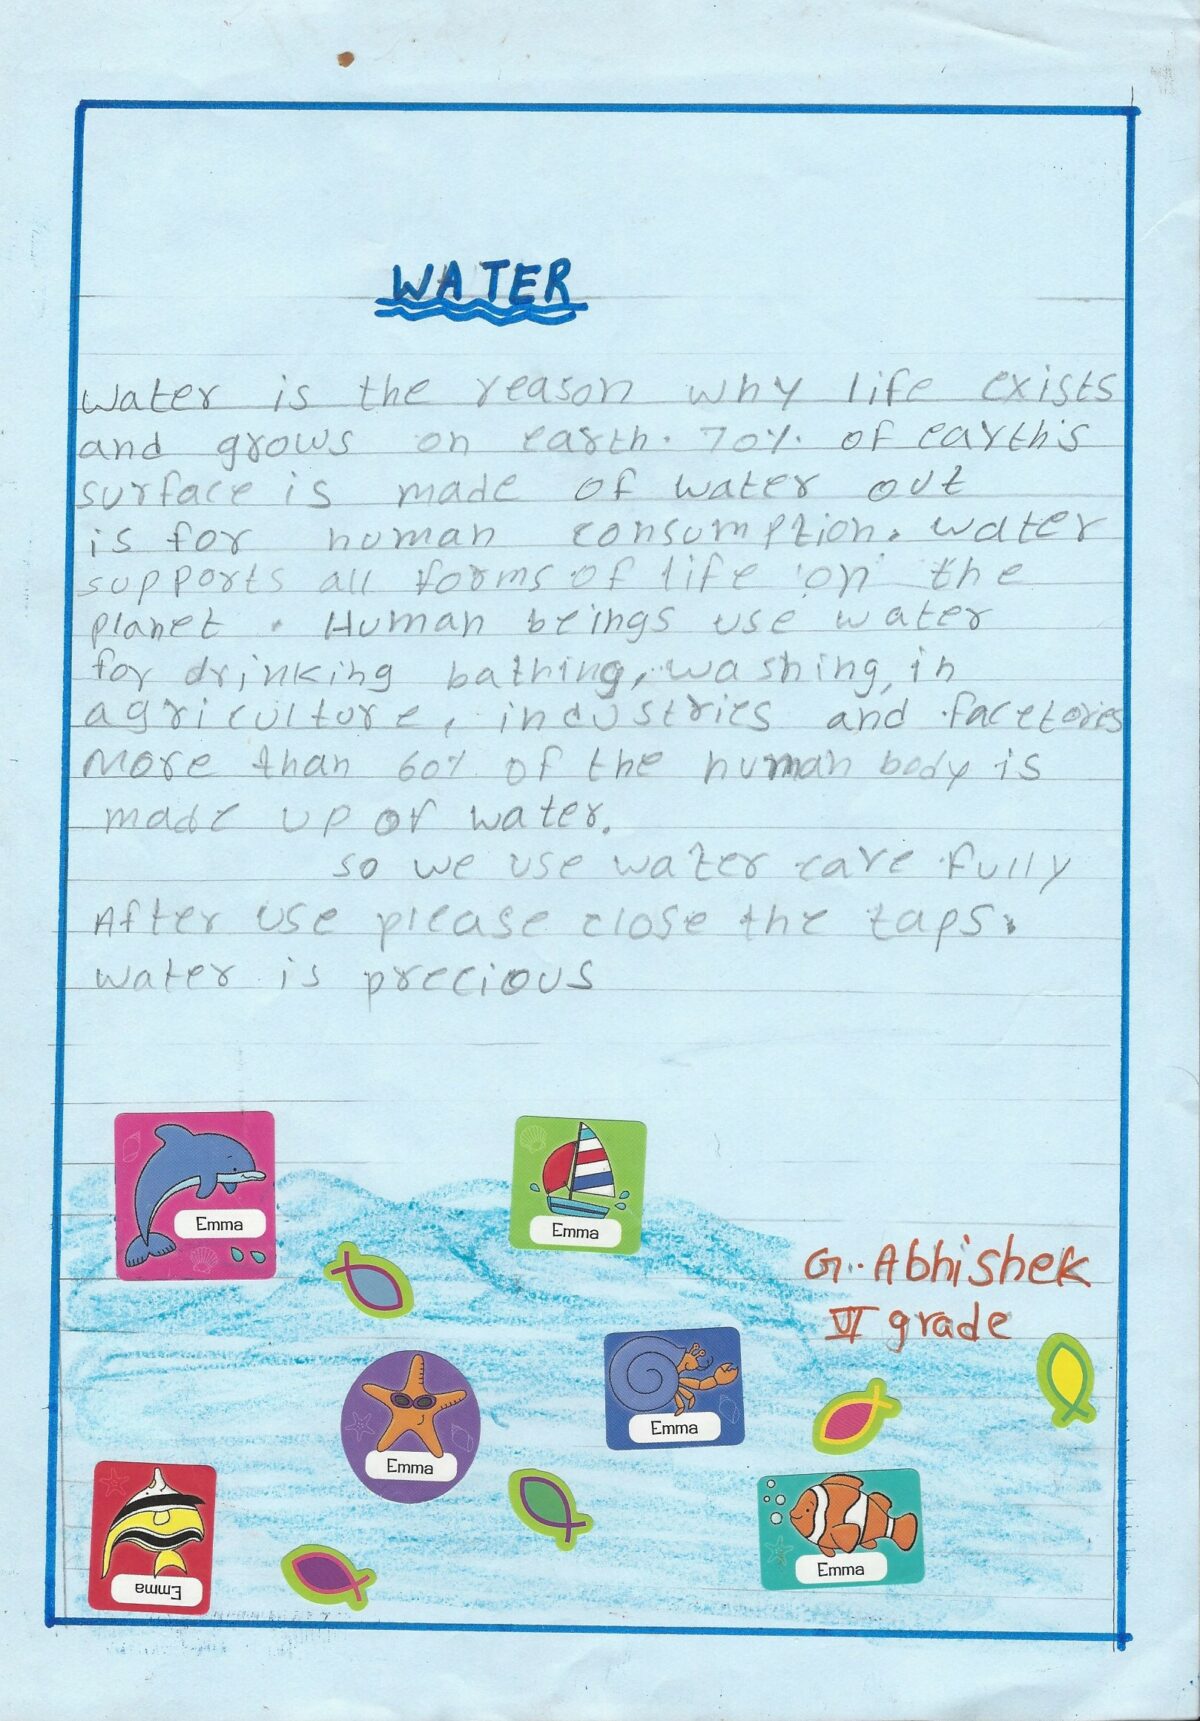 A writing project by young boy in India about water